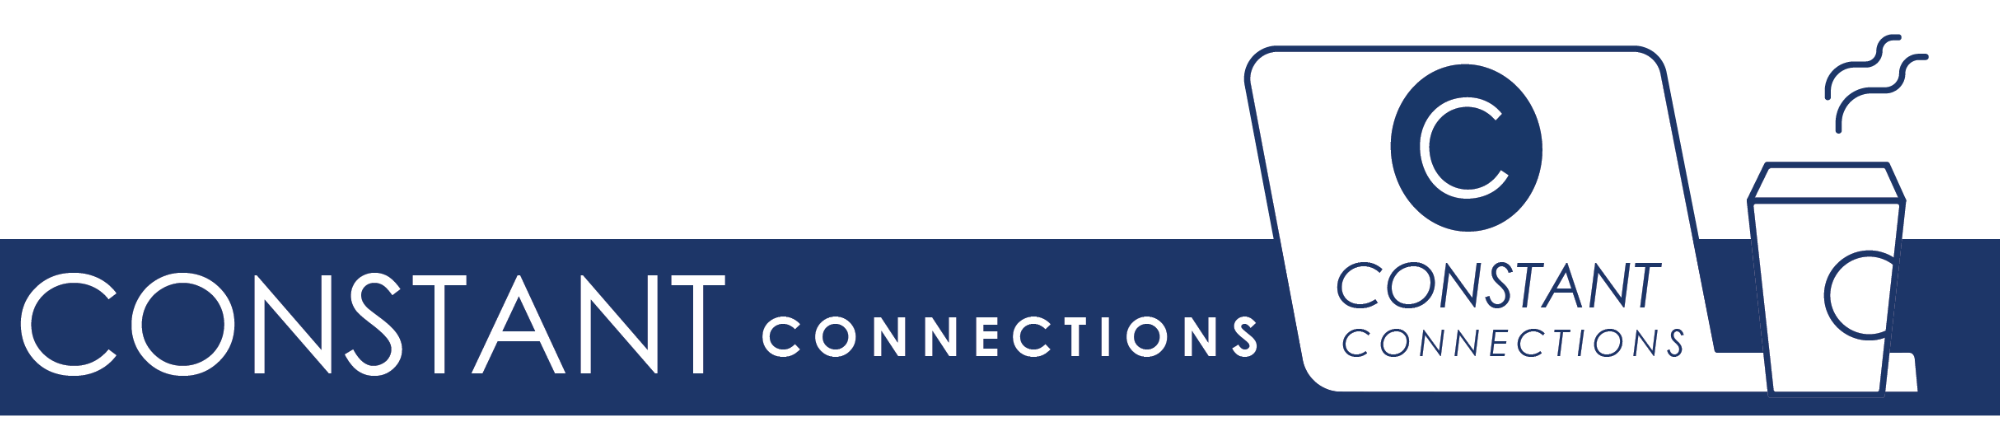 CONSTANT Connections header. Features navy blue banner saying CONSTANT Connections with laptop computer and coffee symbol to the right.